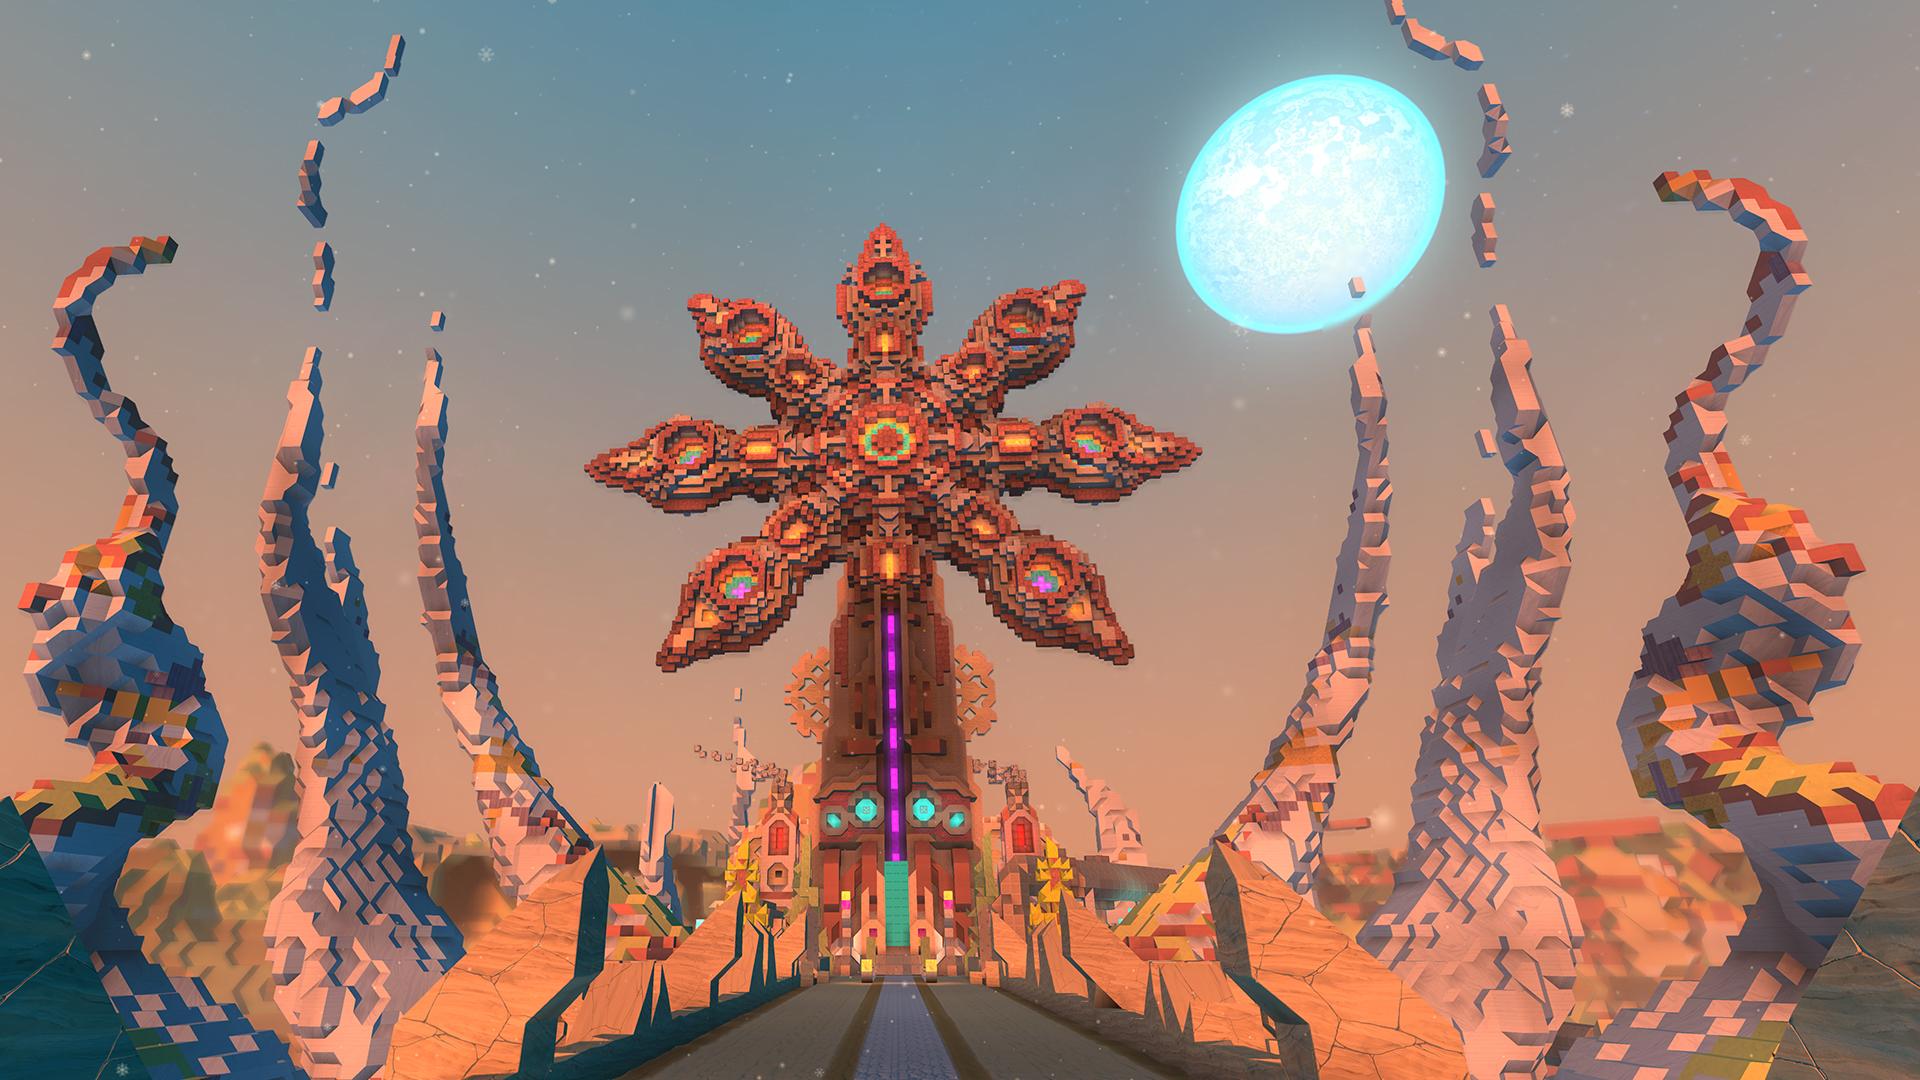 Screenshot №4 from game Boundless